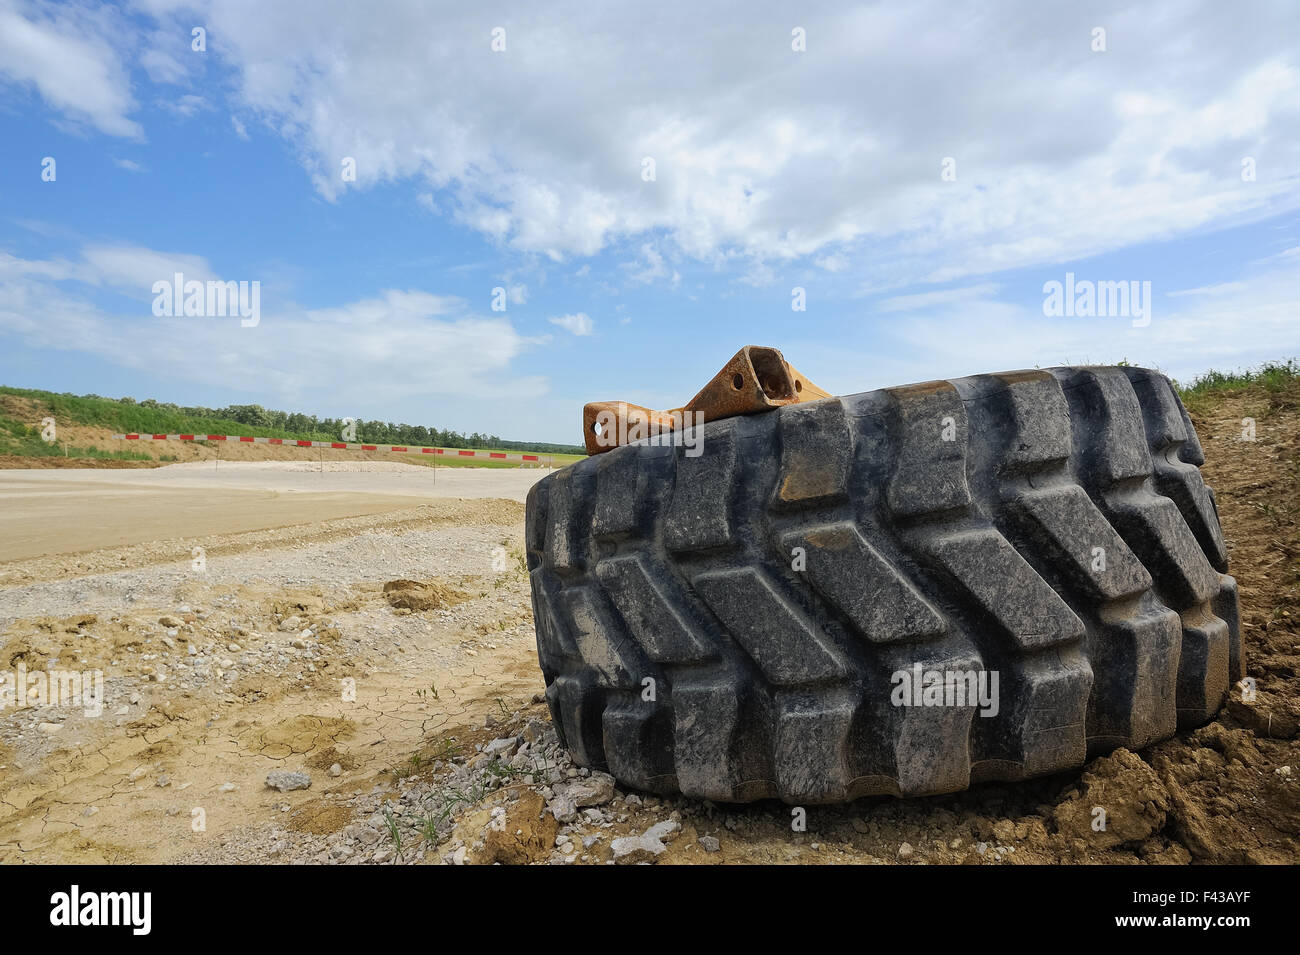 Wheel of a truck on a construction site Stock Photo